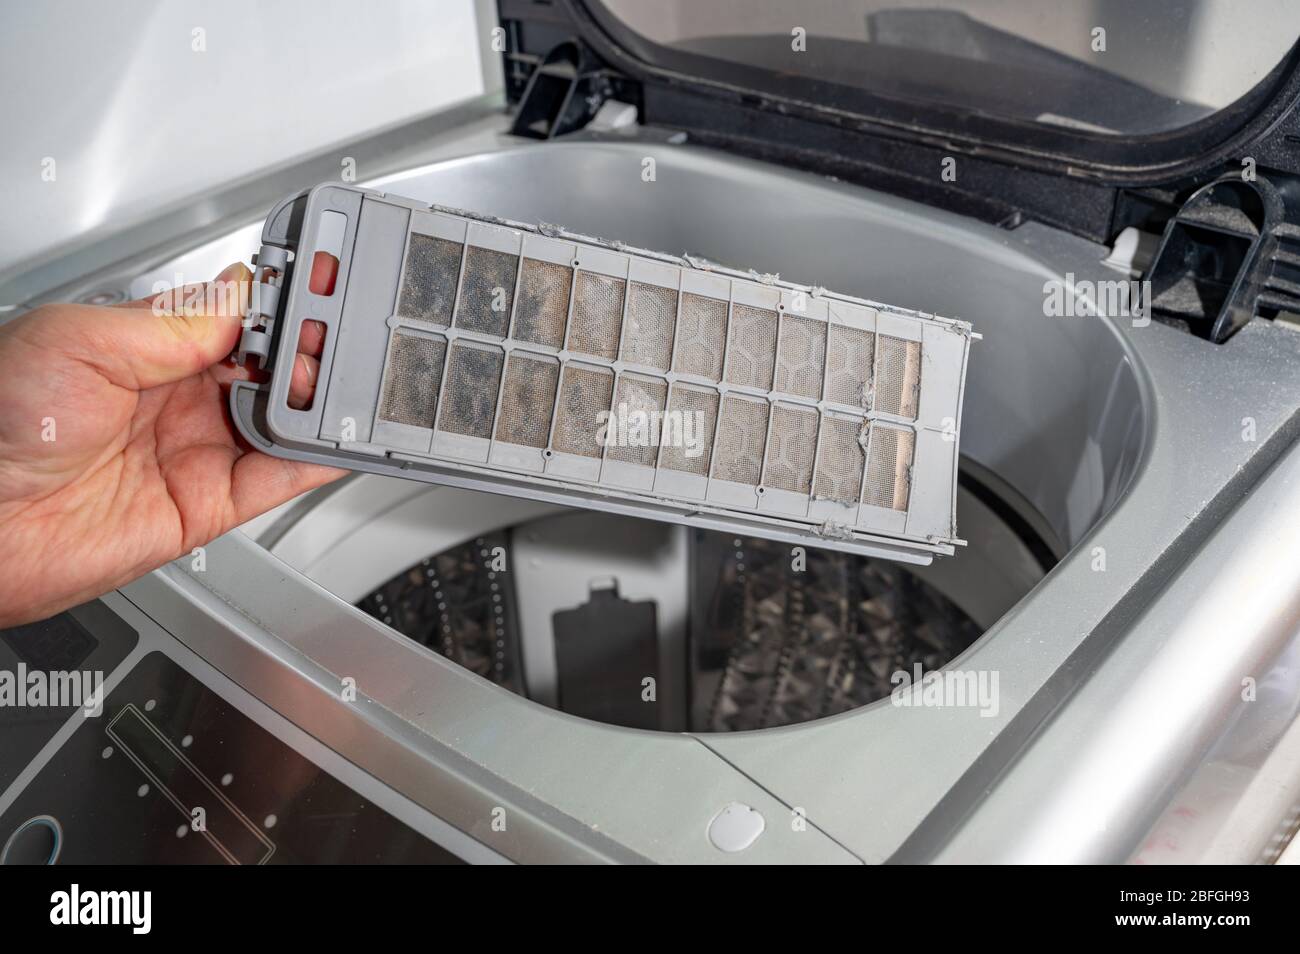 Whatever happened to washing machine lint filters?